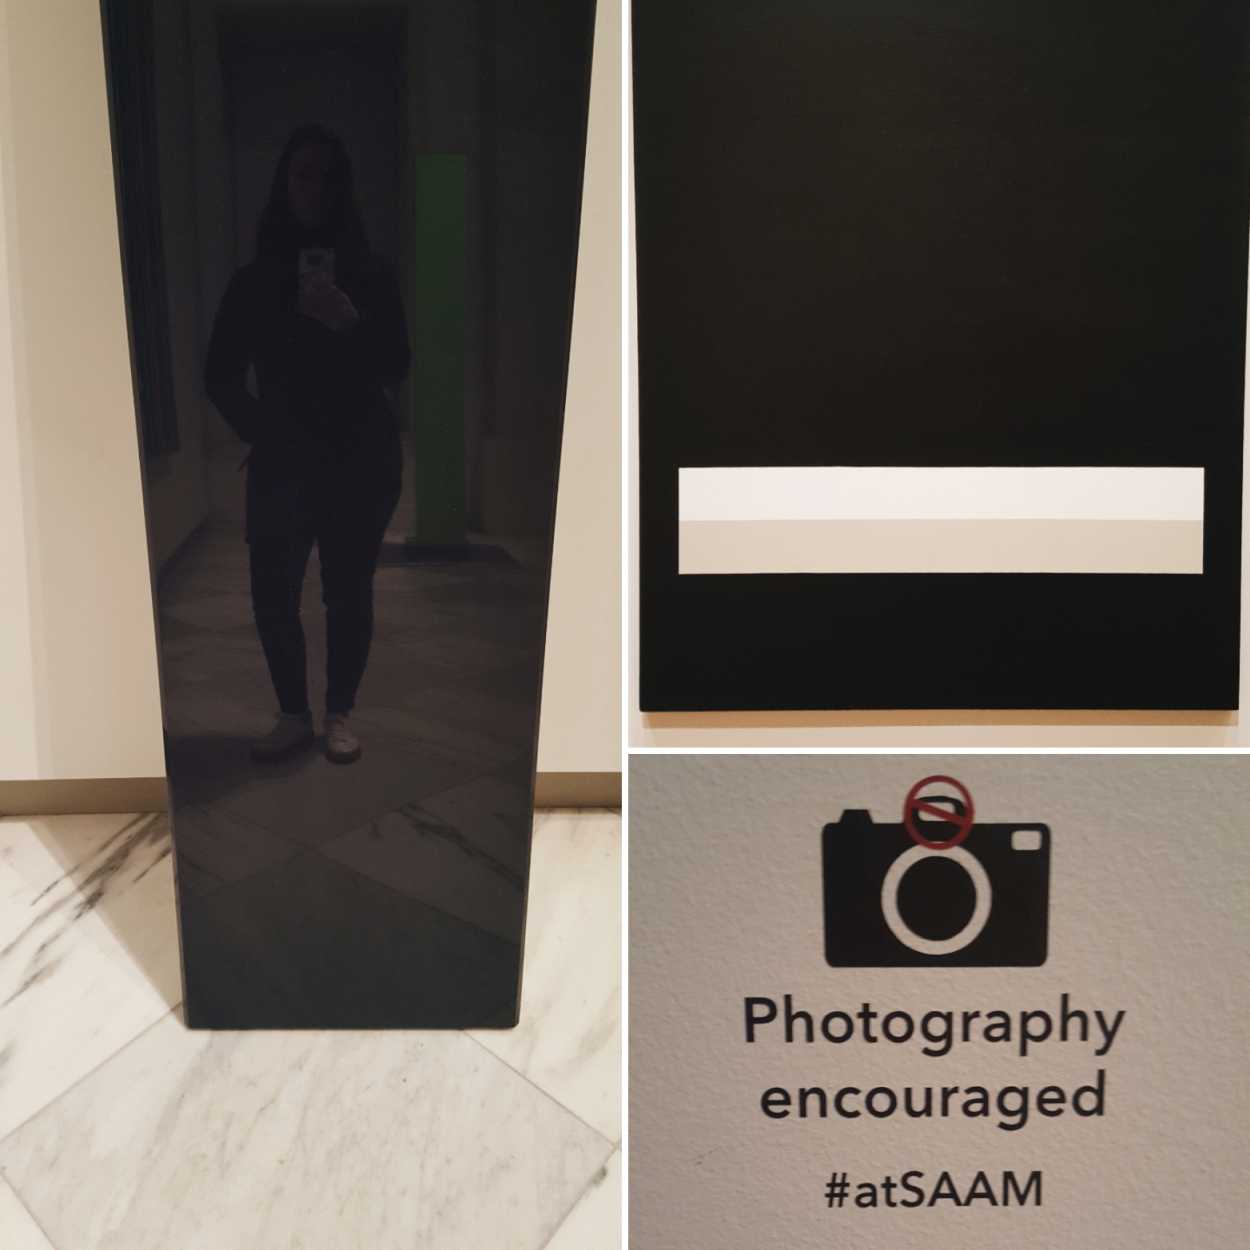 Photography is encouraged at the American Art Museum